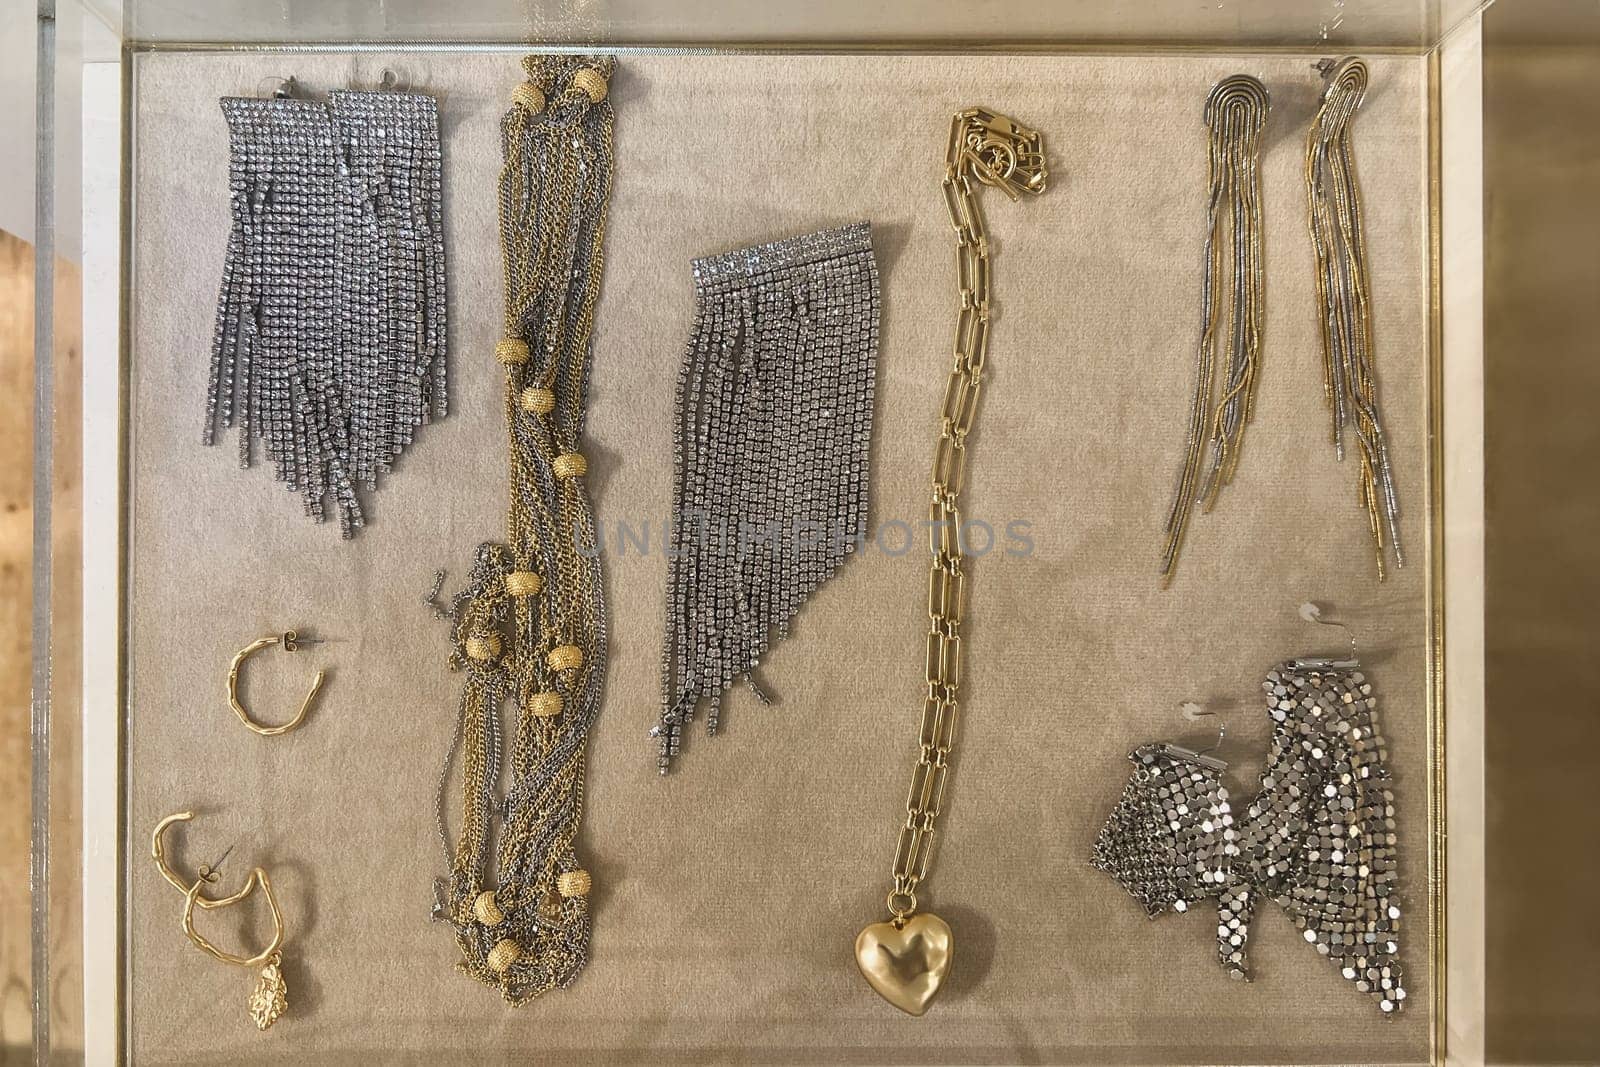 Chains, earrings, necklaces in a store window